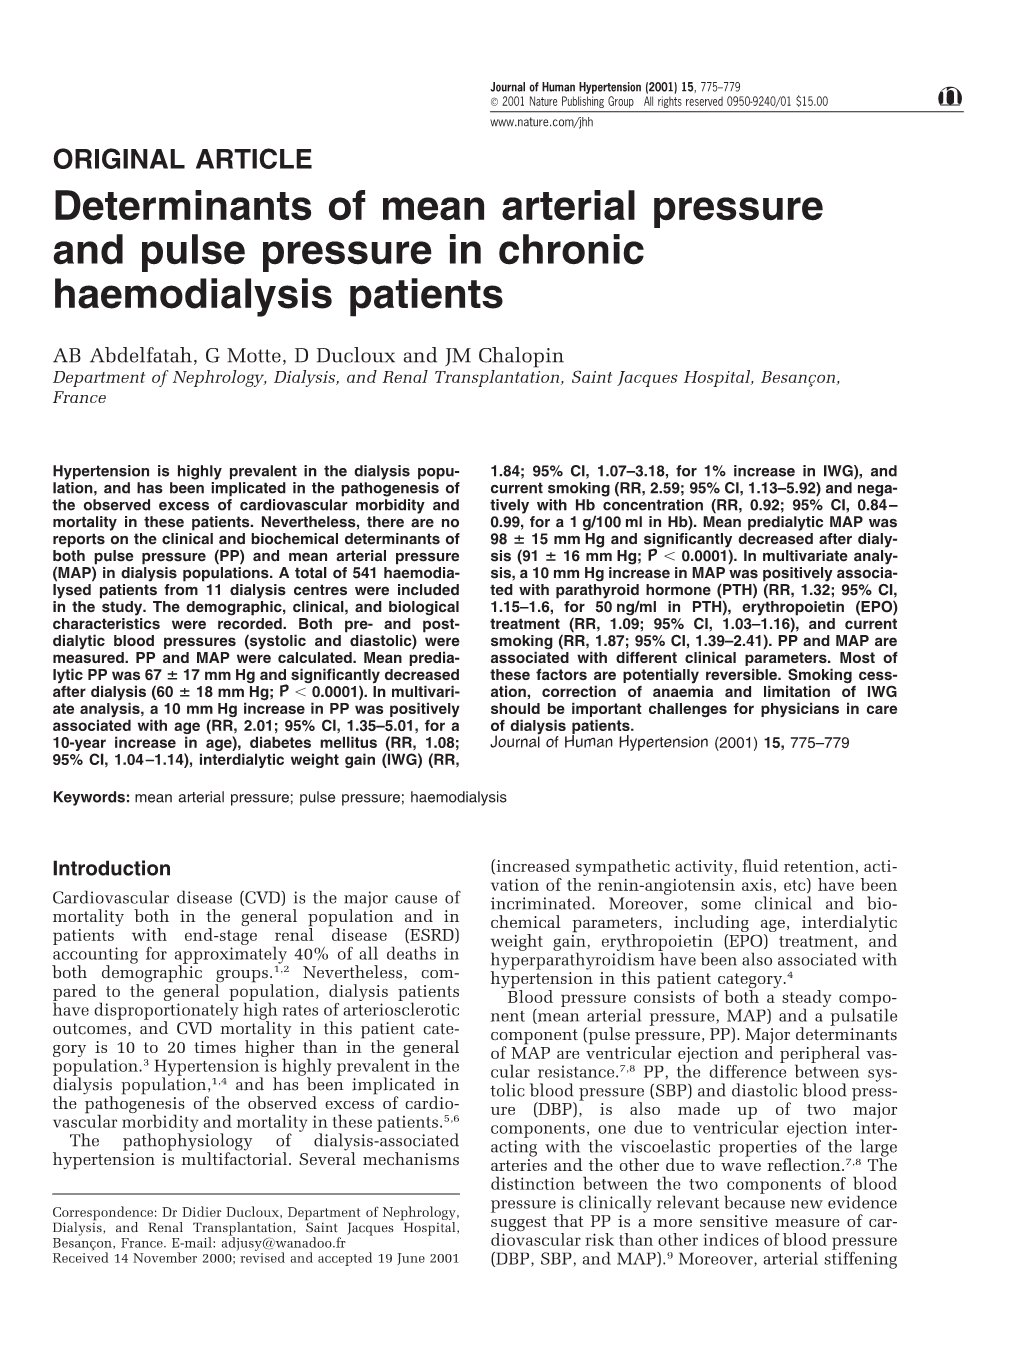 Determinants of Mean Arterial Pressure and Pulse Pressure in Chronic Haemodialysis Patients